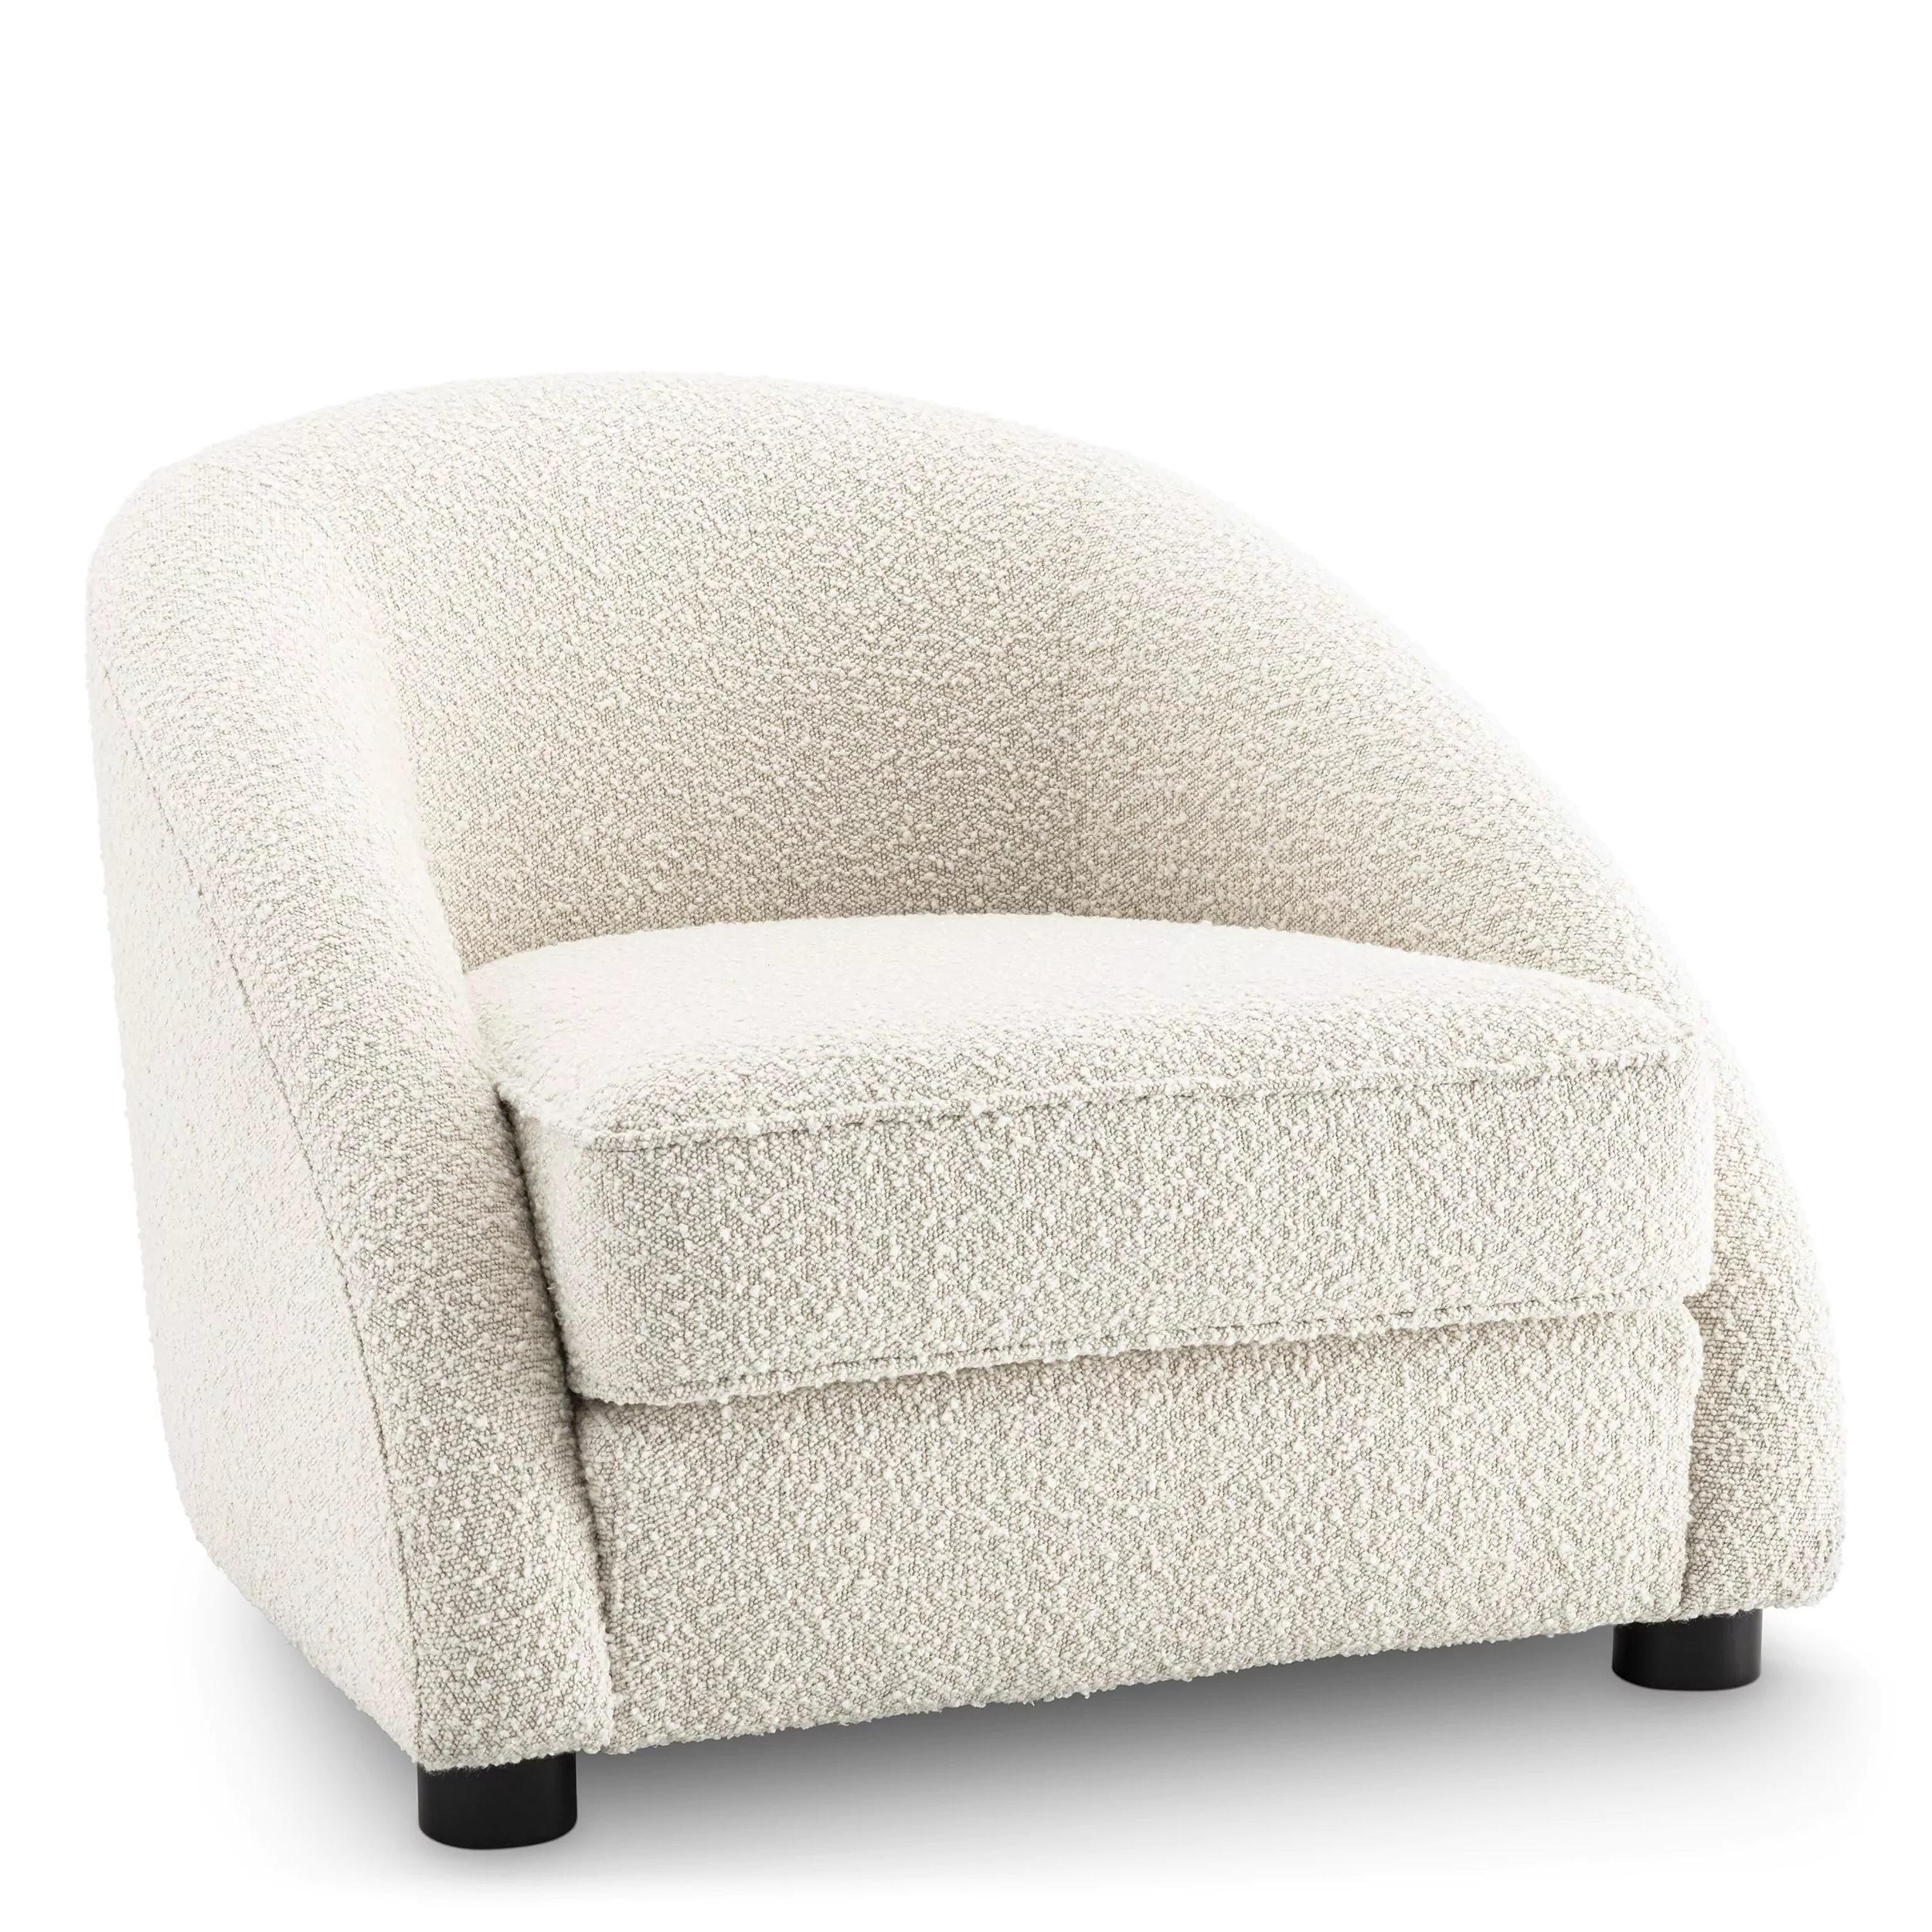 Welcoming and curved armchair in beige bouclé fabric with black wooden feet.